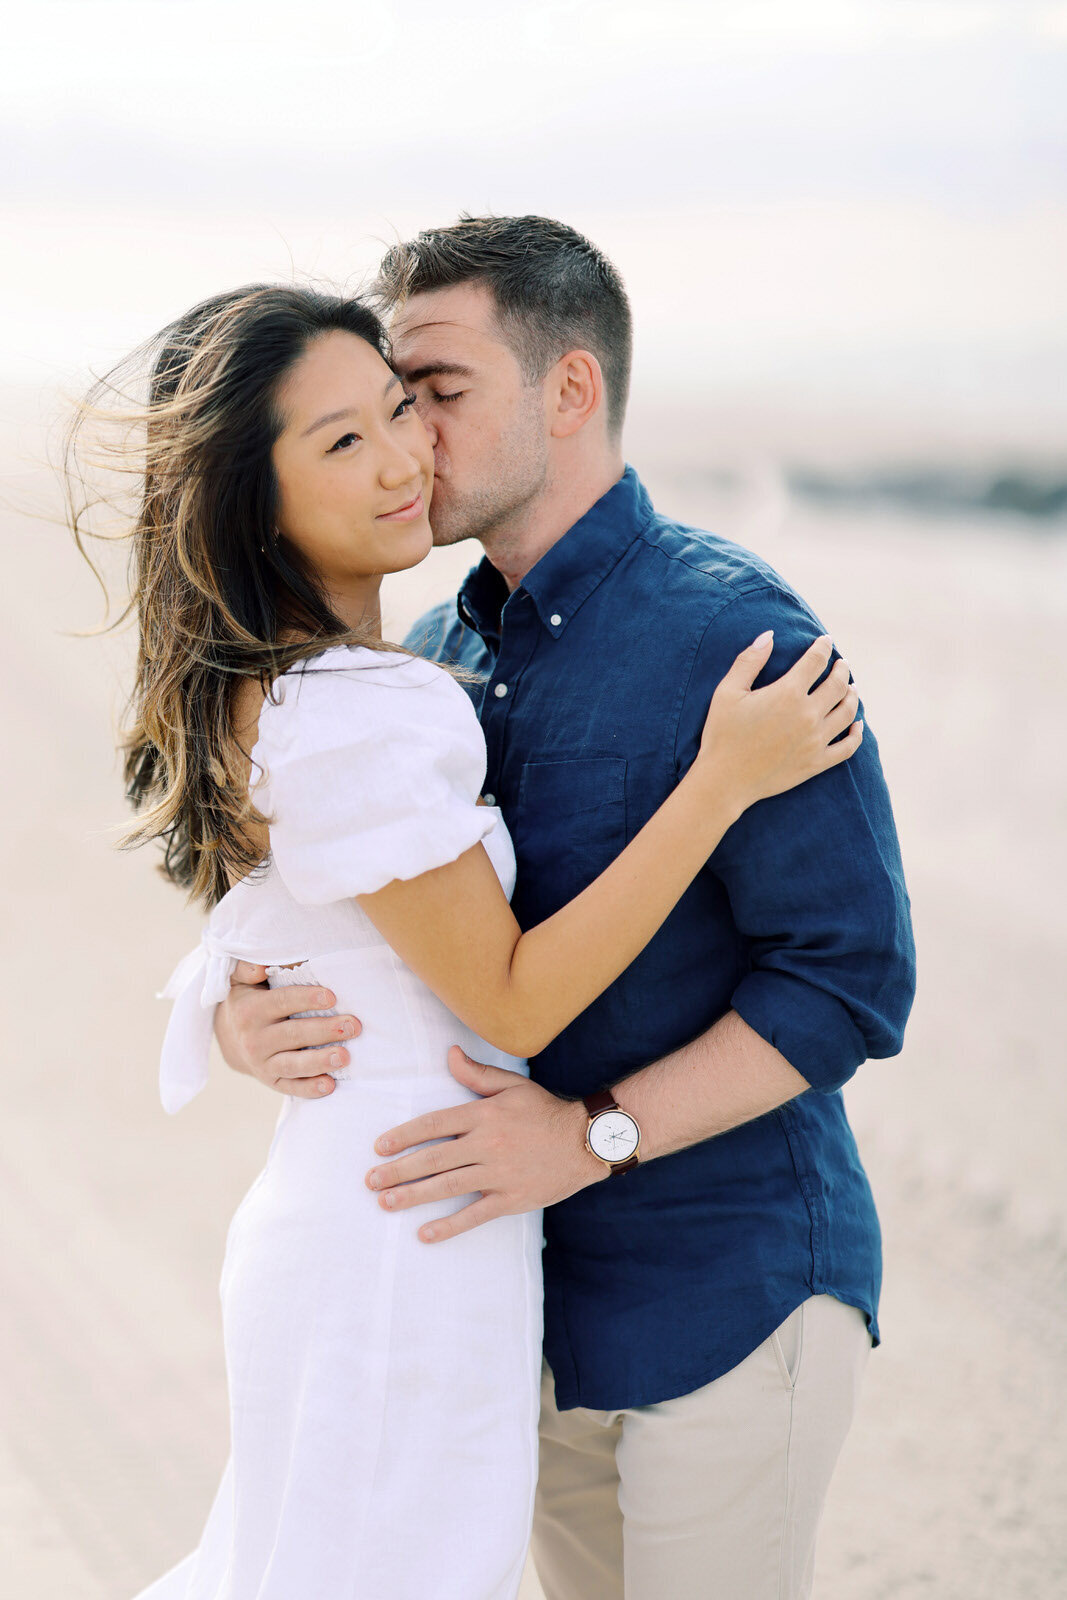 Romantic film beach engagement photography session in Cape May, New Jersey.